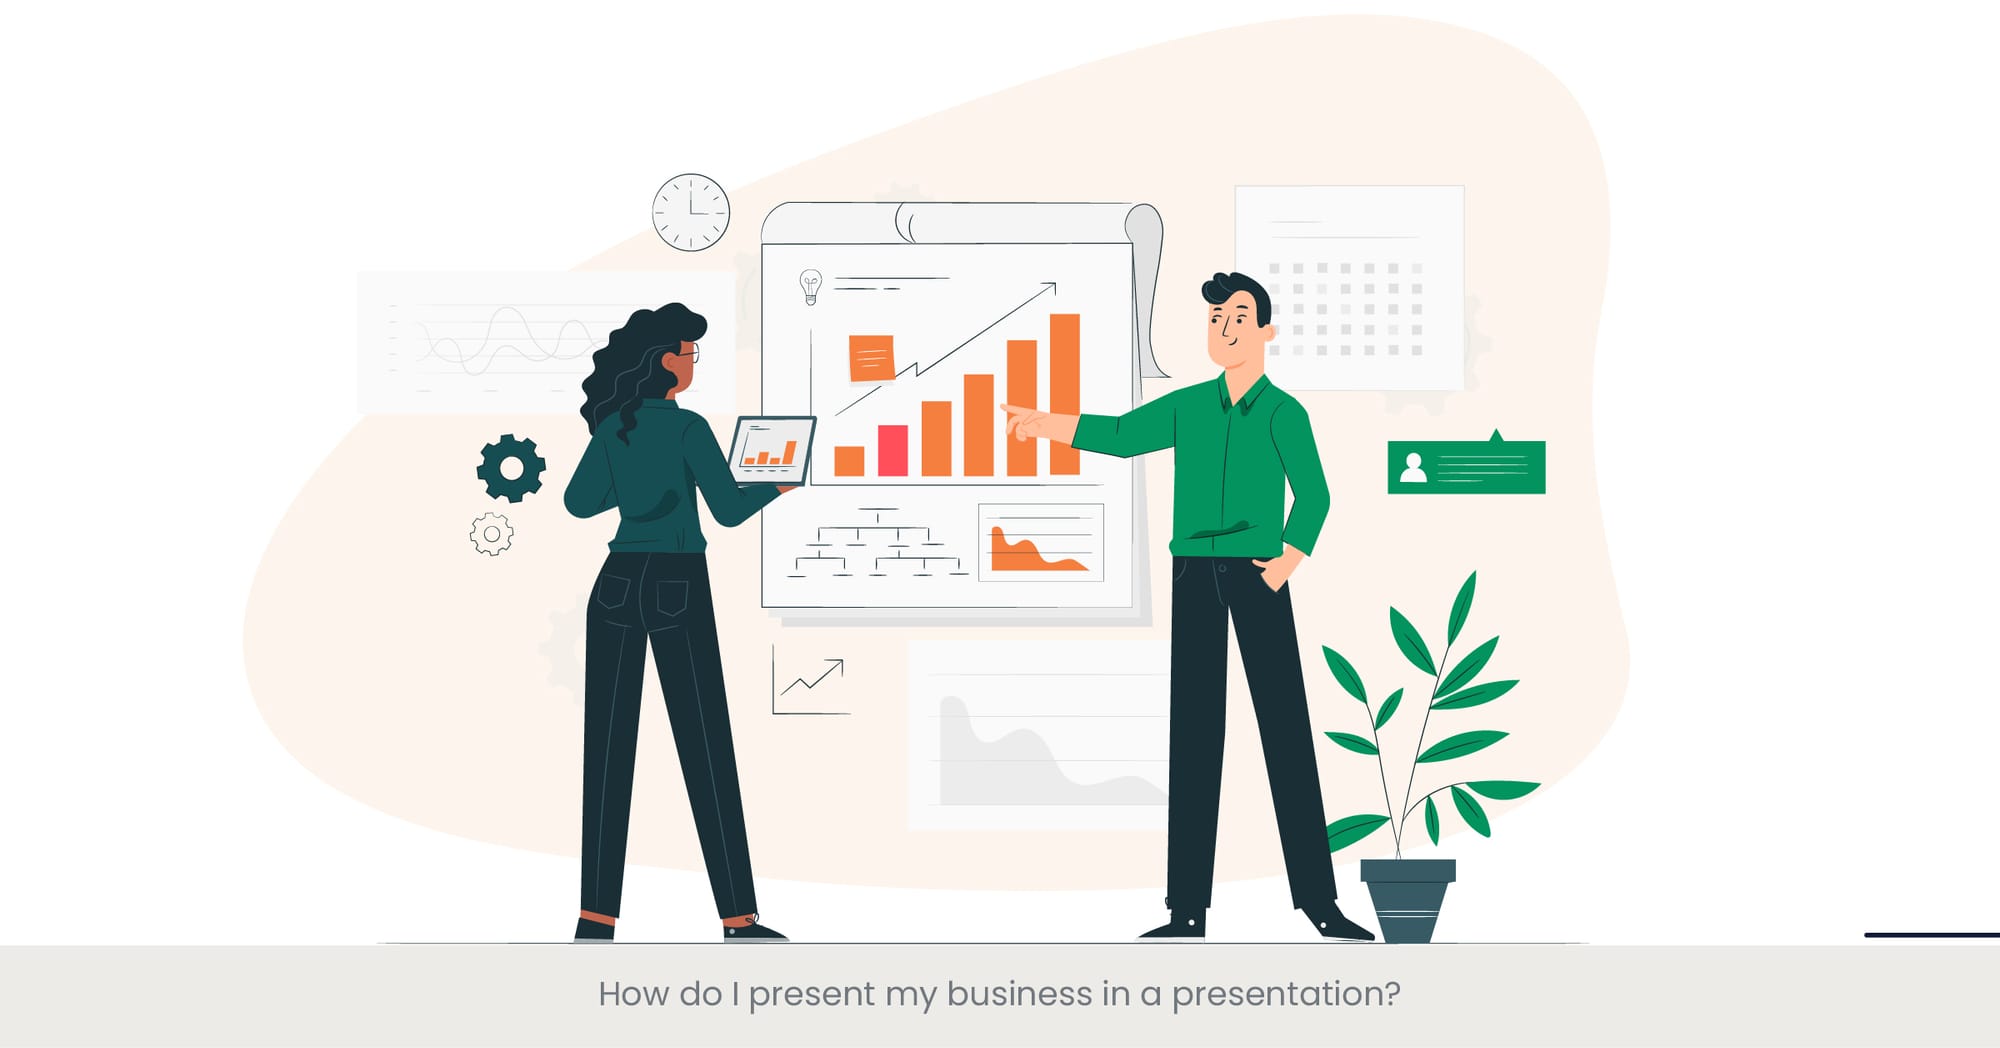 How do I present my business in a presentation?